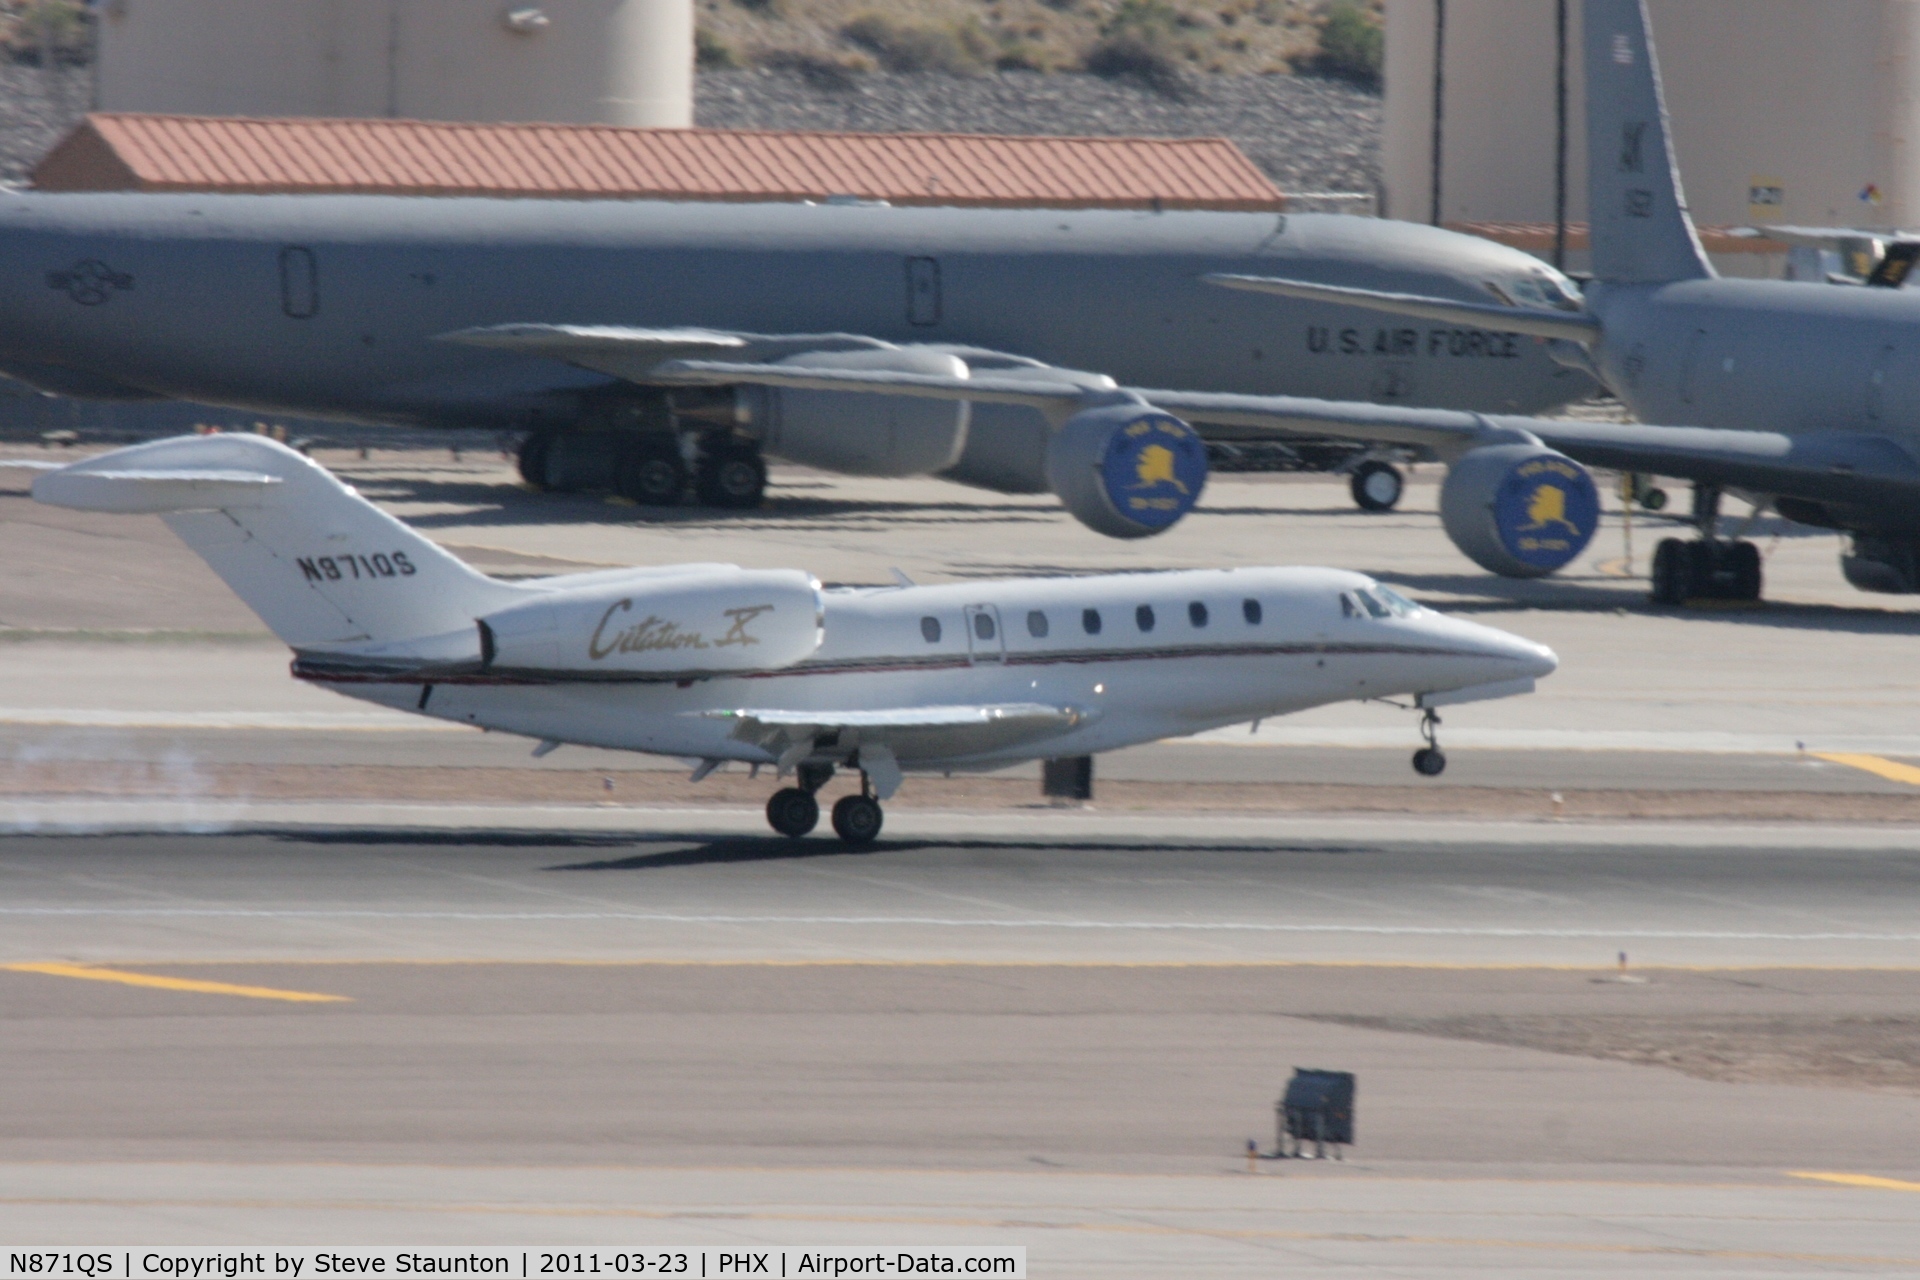 N871QS, 2006 Raytheon Hawker 800XP C/N 258763, Taken at Phoenix Sky Harbor Airport, in March 2011 whilst on an Aeroprint Aviation tour